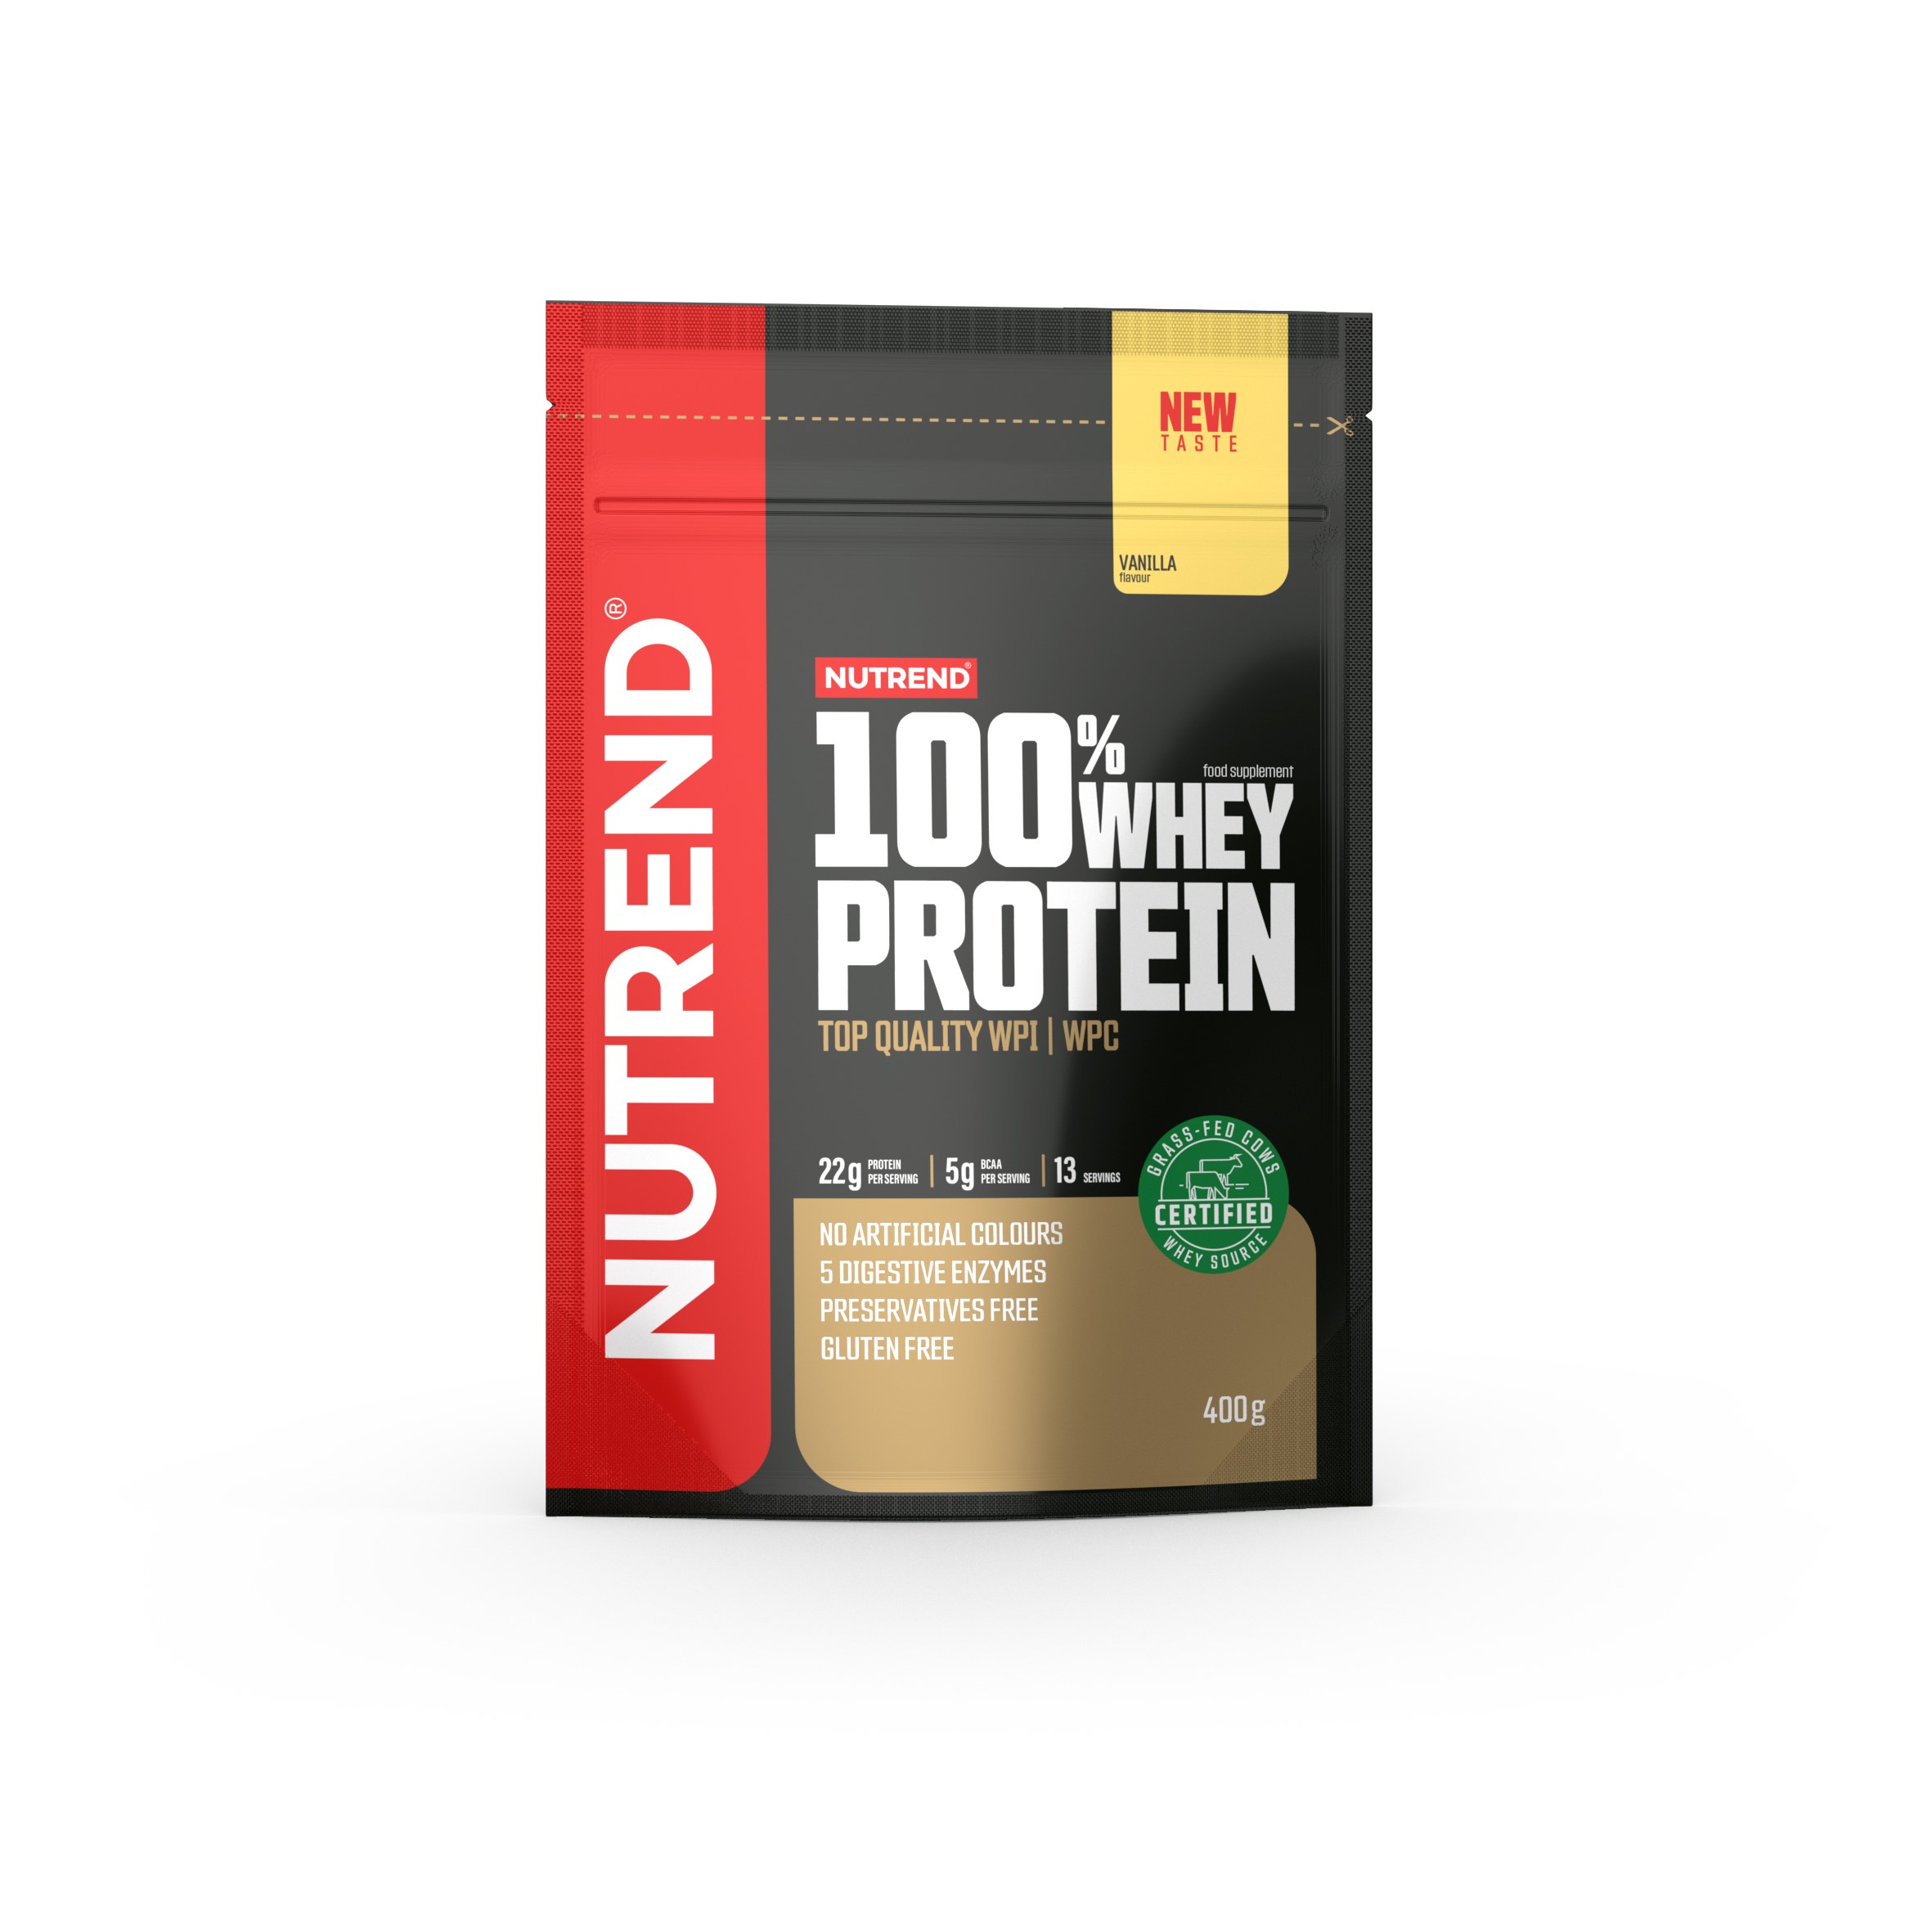 Concentrate Proteice - Nutrend 100% WHEY PROTEIN 400g Ciocolata, https:0769429911.websales.ro